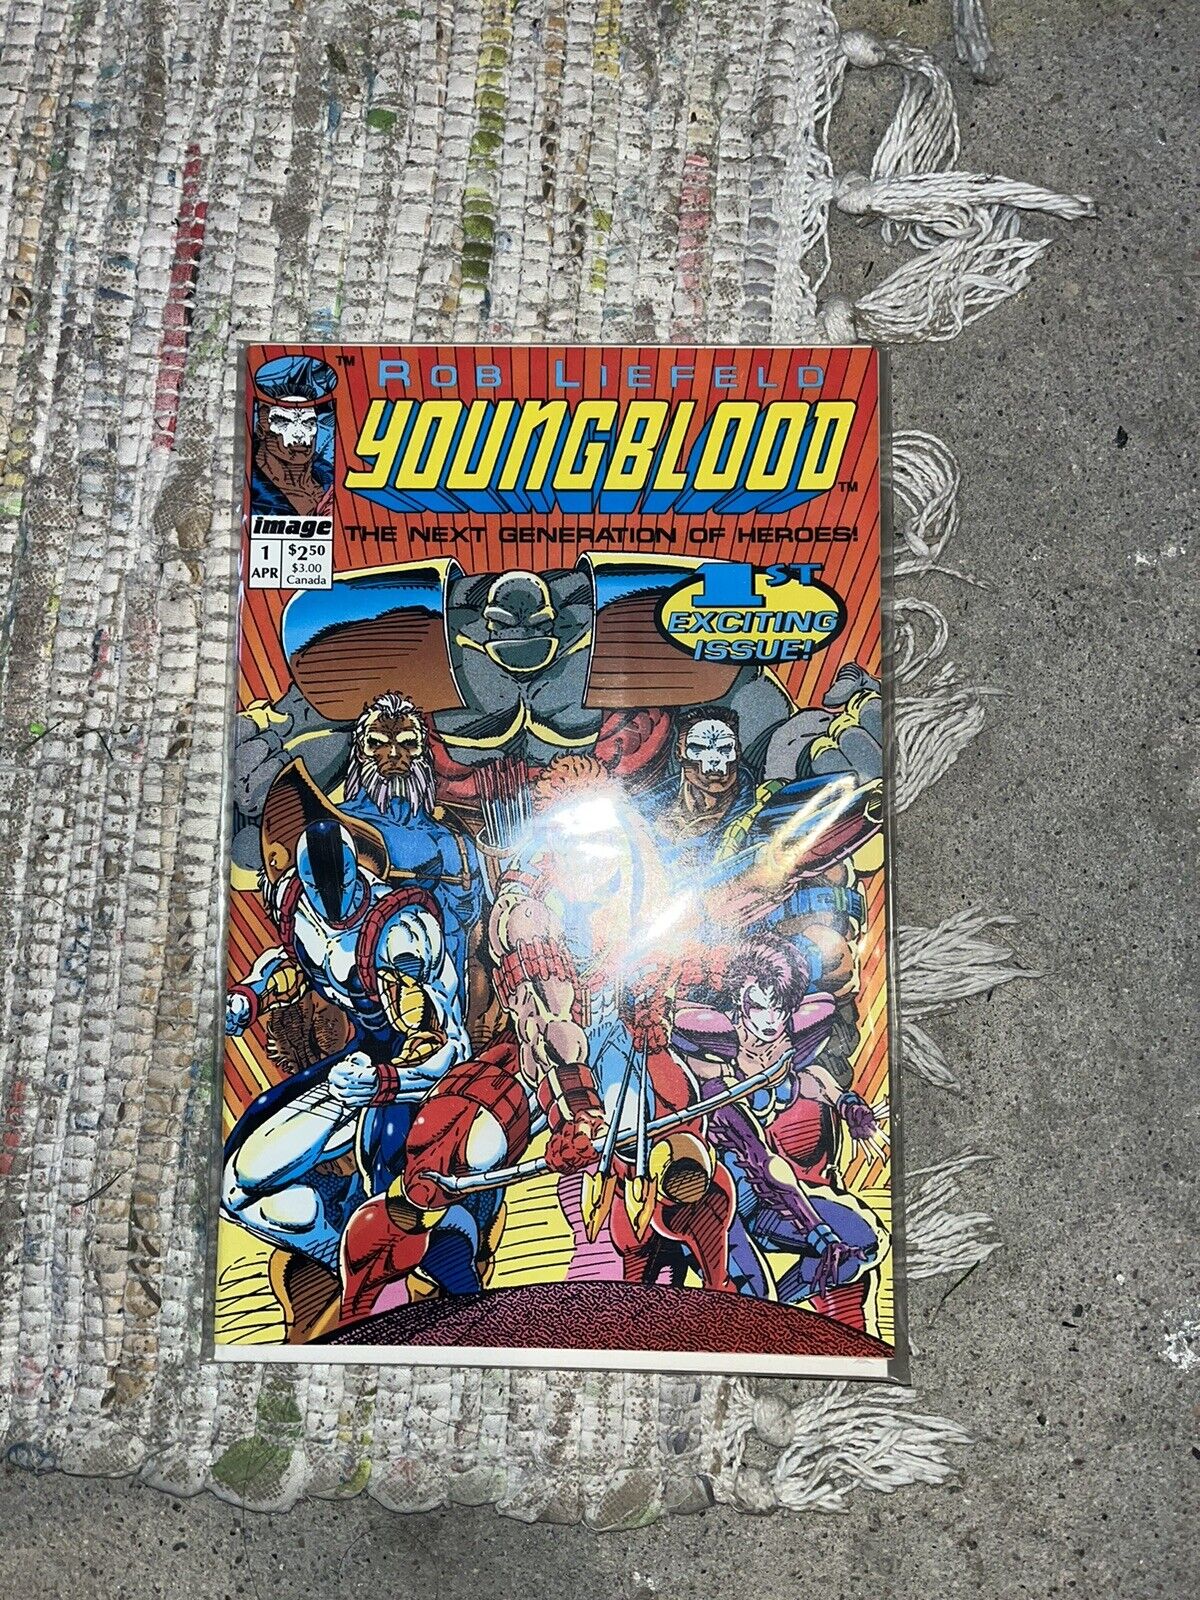 Team Youngblood #1 (Sep 1993, Image)